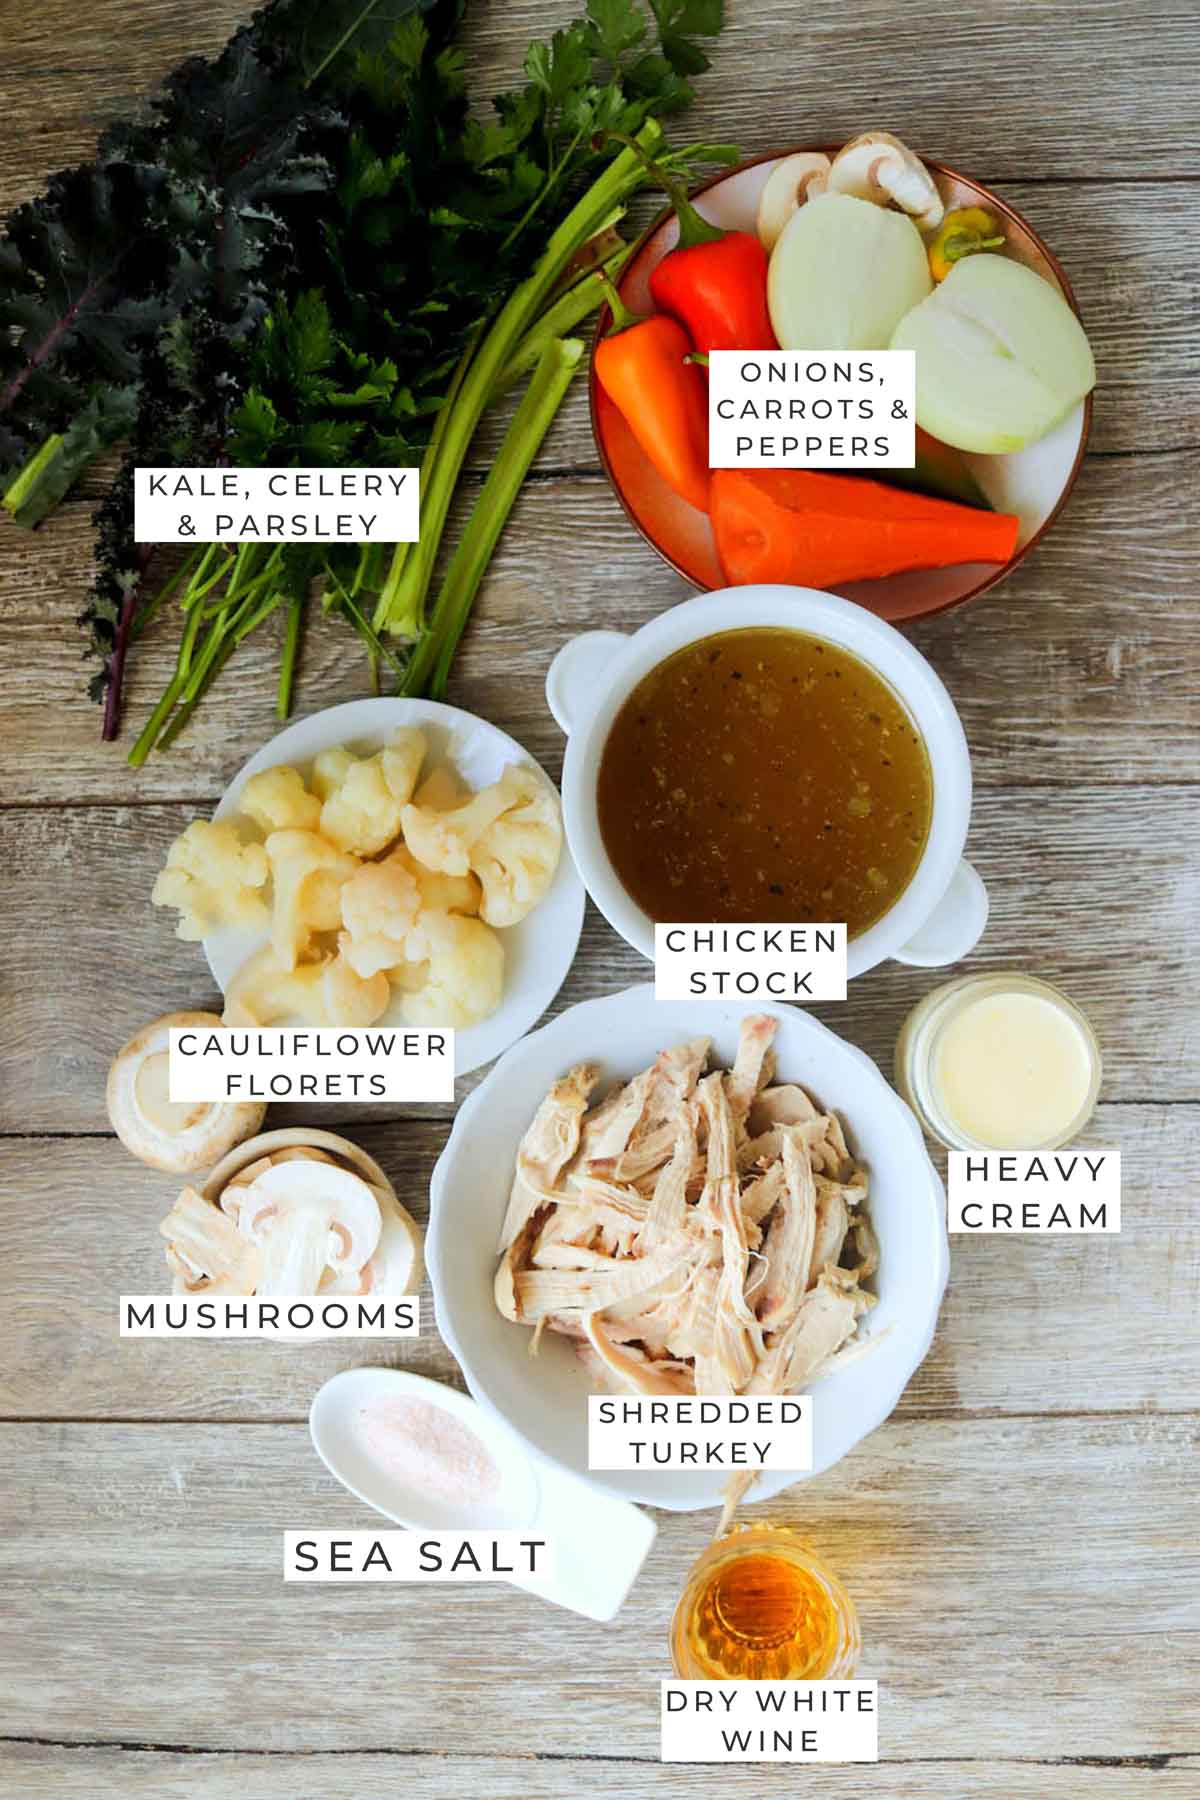 Labeled ingredients for the soup.